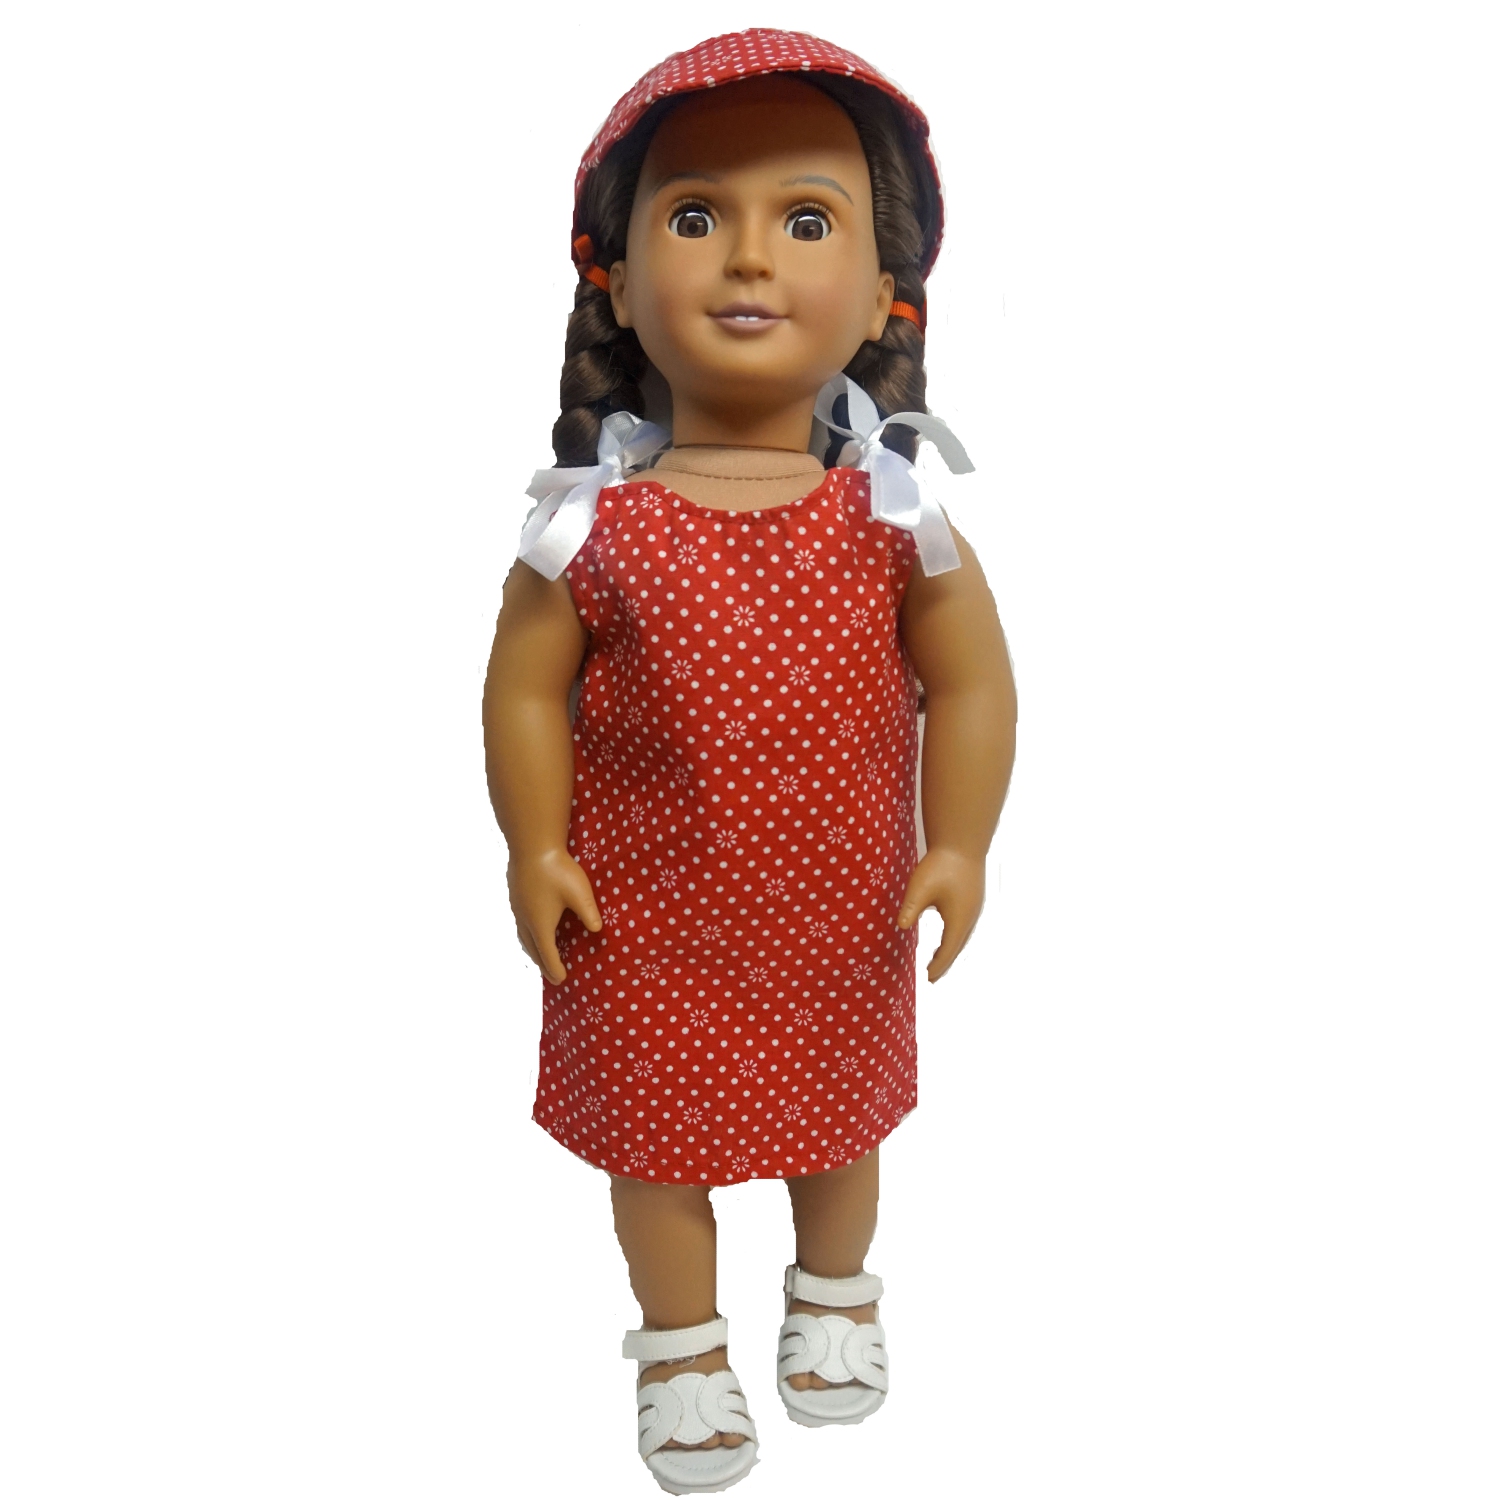 Doll Clothes Superstore Sporty Red Dots Outfit For 18 Inch Girl Dolls Like Our Generation My Life American Girl Dolls